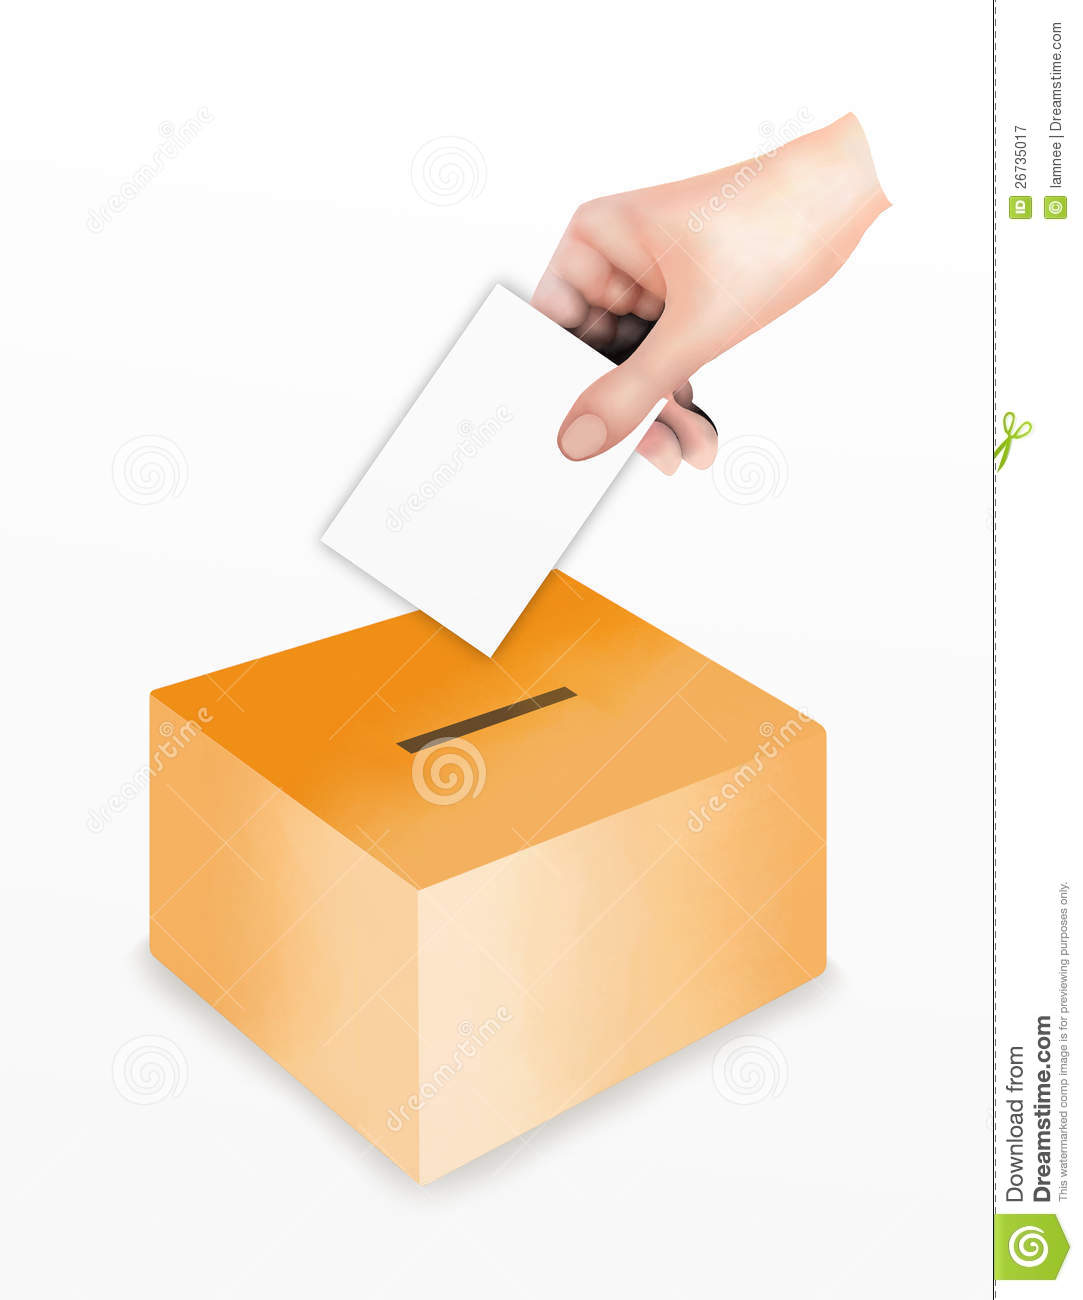 Voting Ballot Clipart Hand Putting A Voting At The